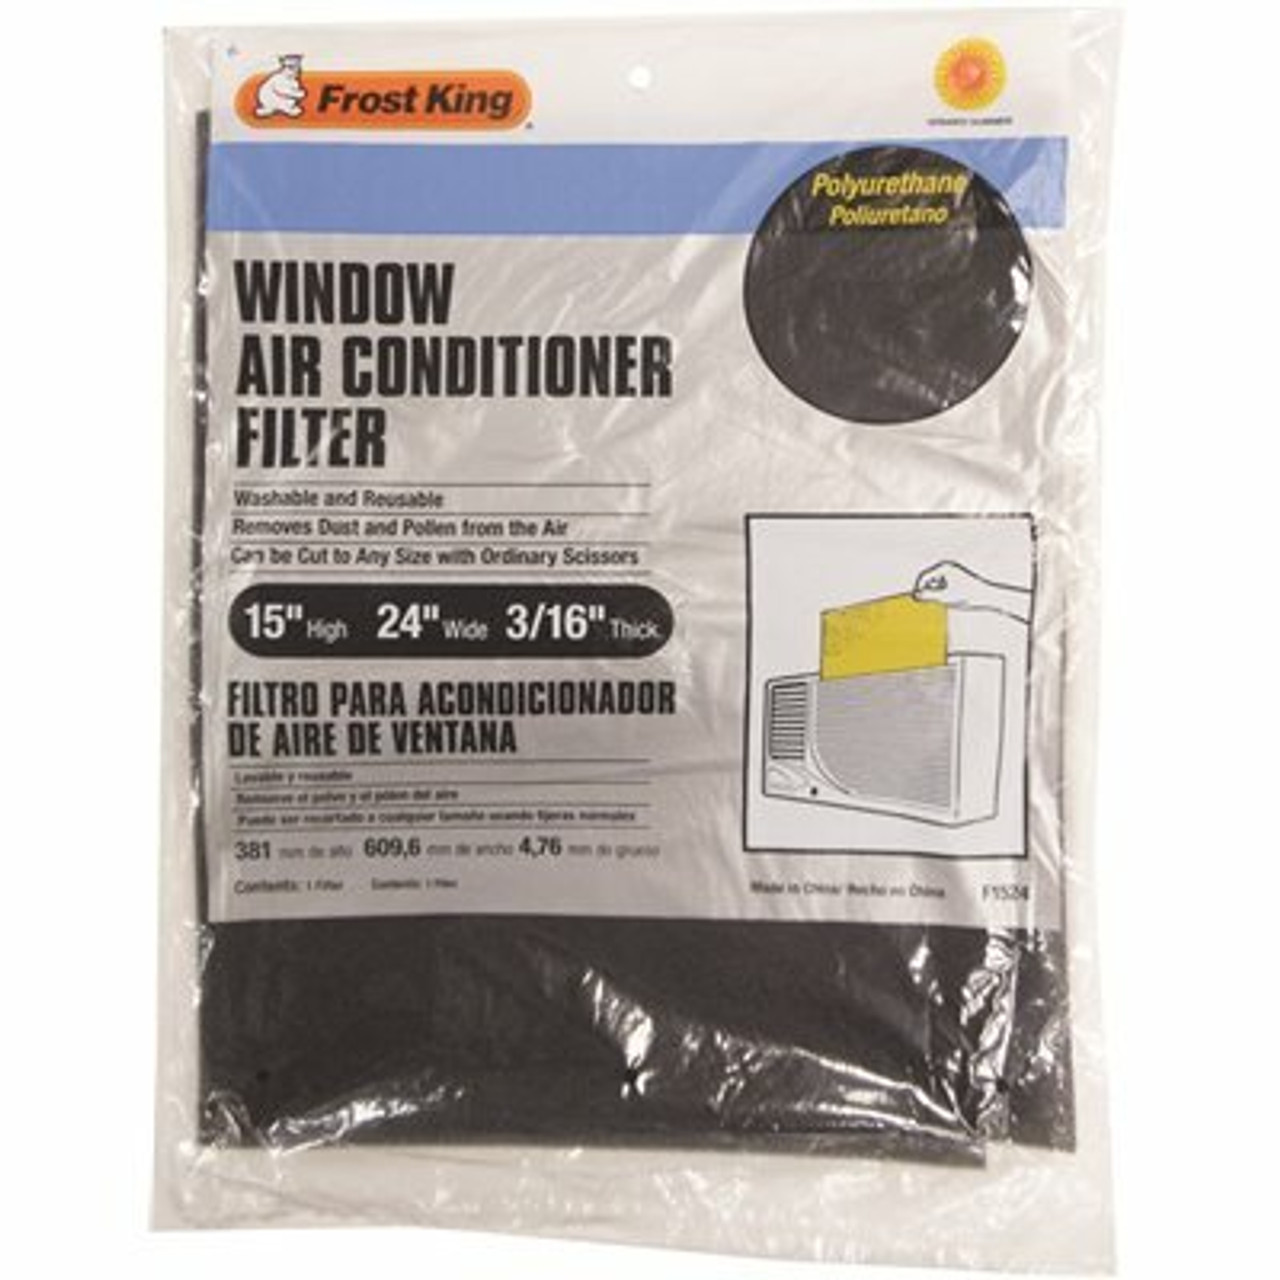 Frost King 15 X 24 X 3/16 Air Conditioner Foam Filter